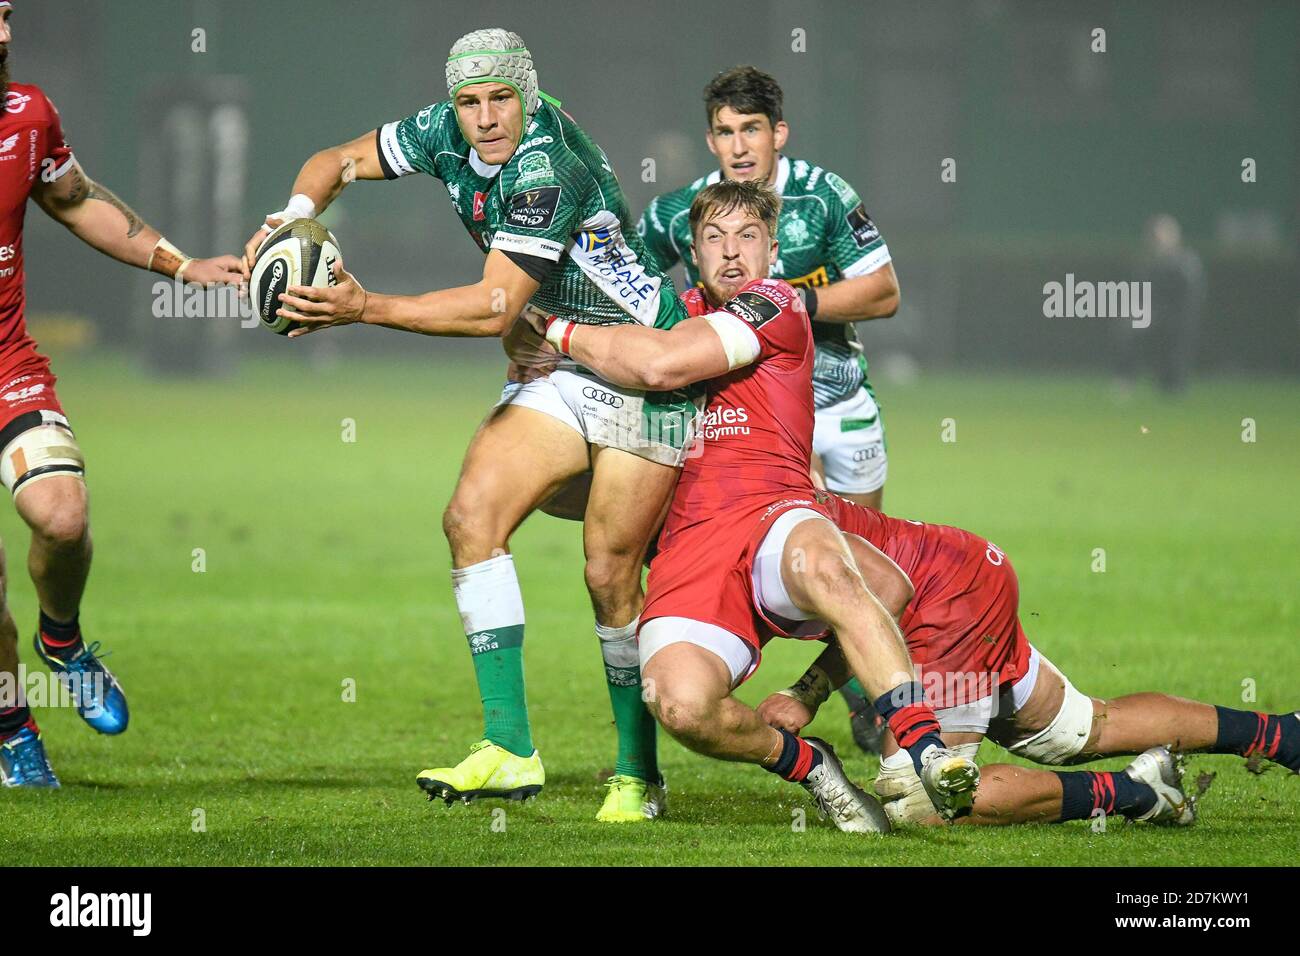 Stadio Comunale di Monigo, Treviso, Italy, 23 Oct 2020, Ignacio Brex (Treviso) tackled by Tyler Morgan (Scarlets) during Benetton Treviso vs Scarlets Rugby, Rugby Guinness Pro 14 match - Credit: LM/Ettore Griffoni/Alamy Live News Stock Photo